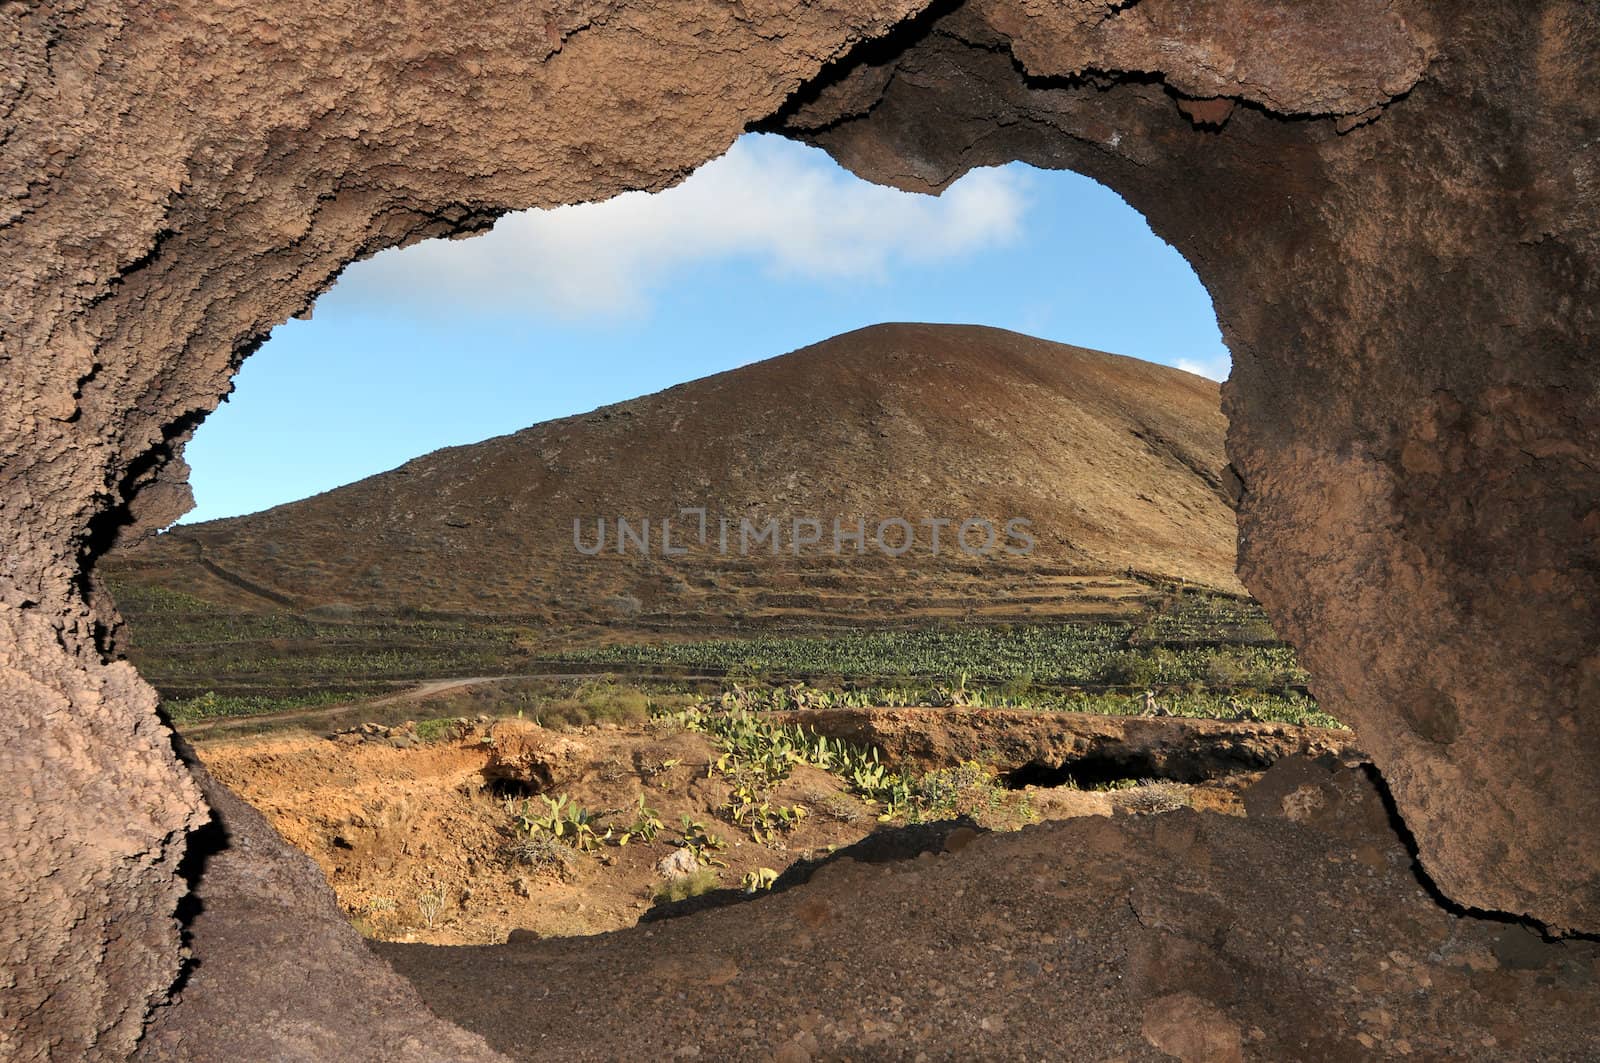 Cave near a volcano in the desert by underworld